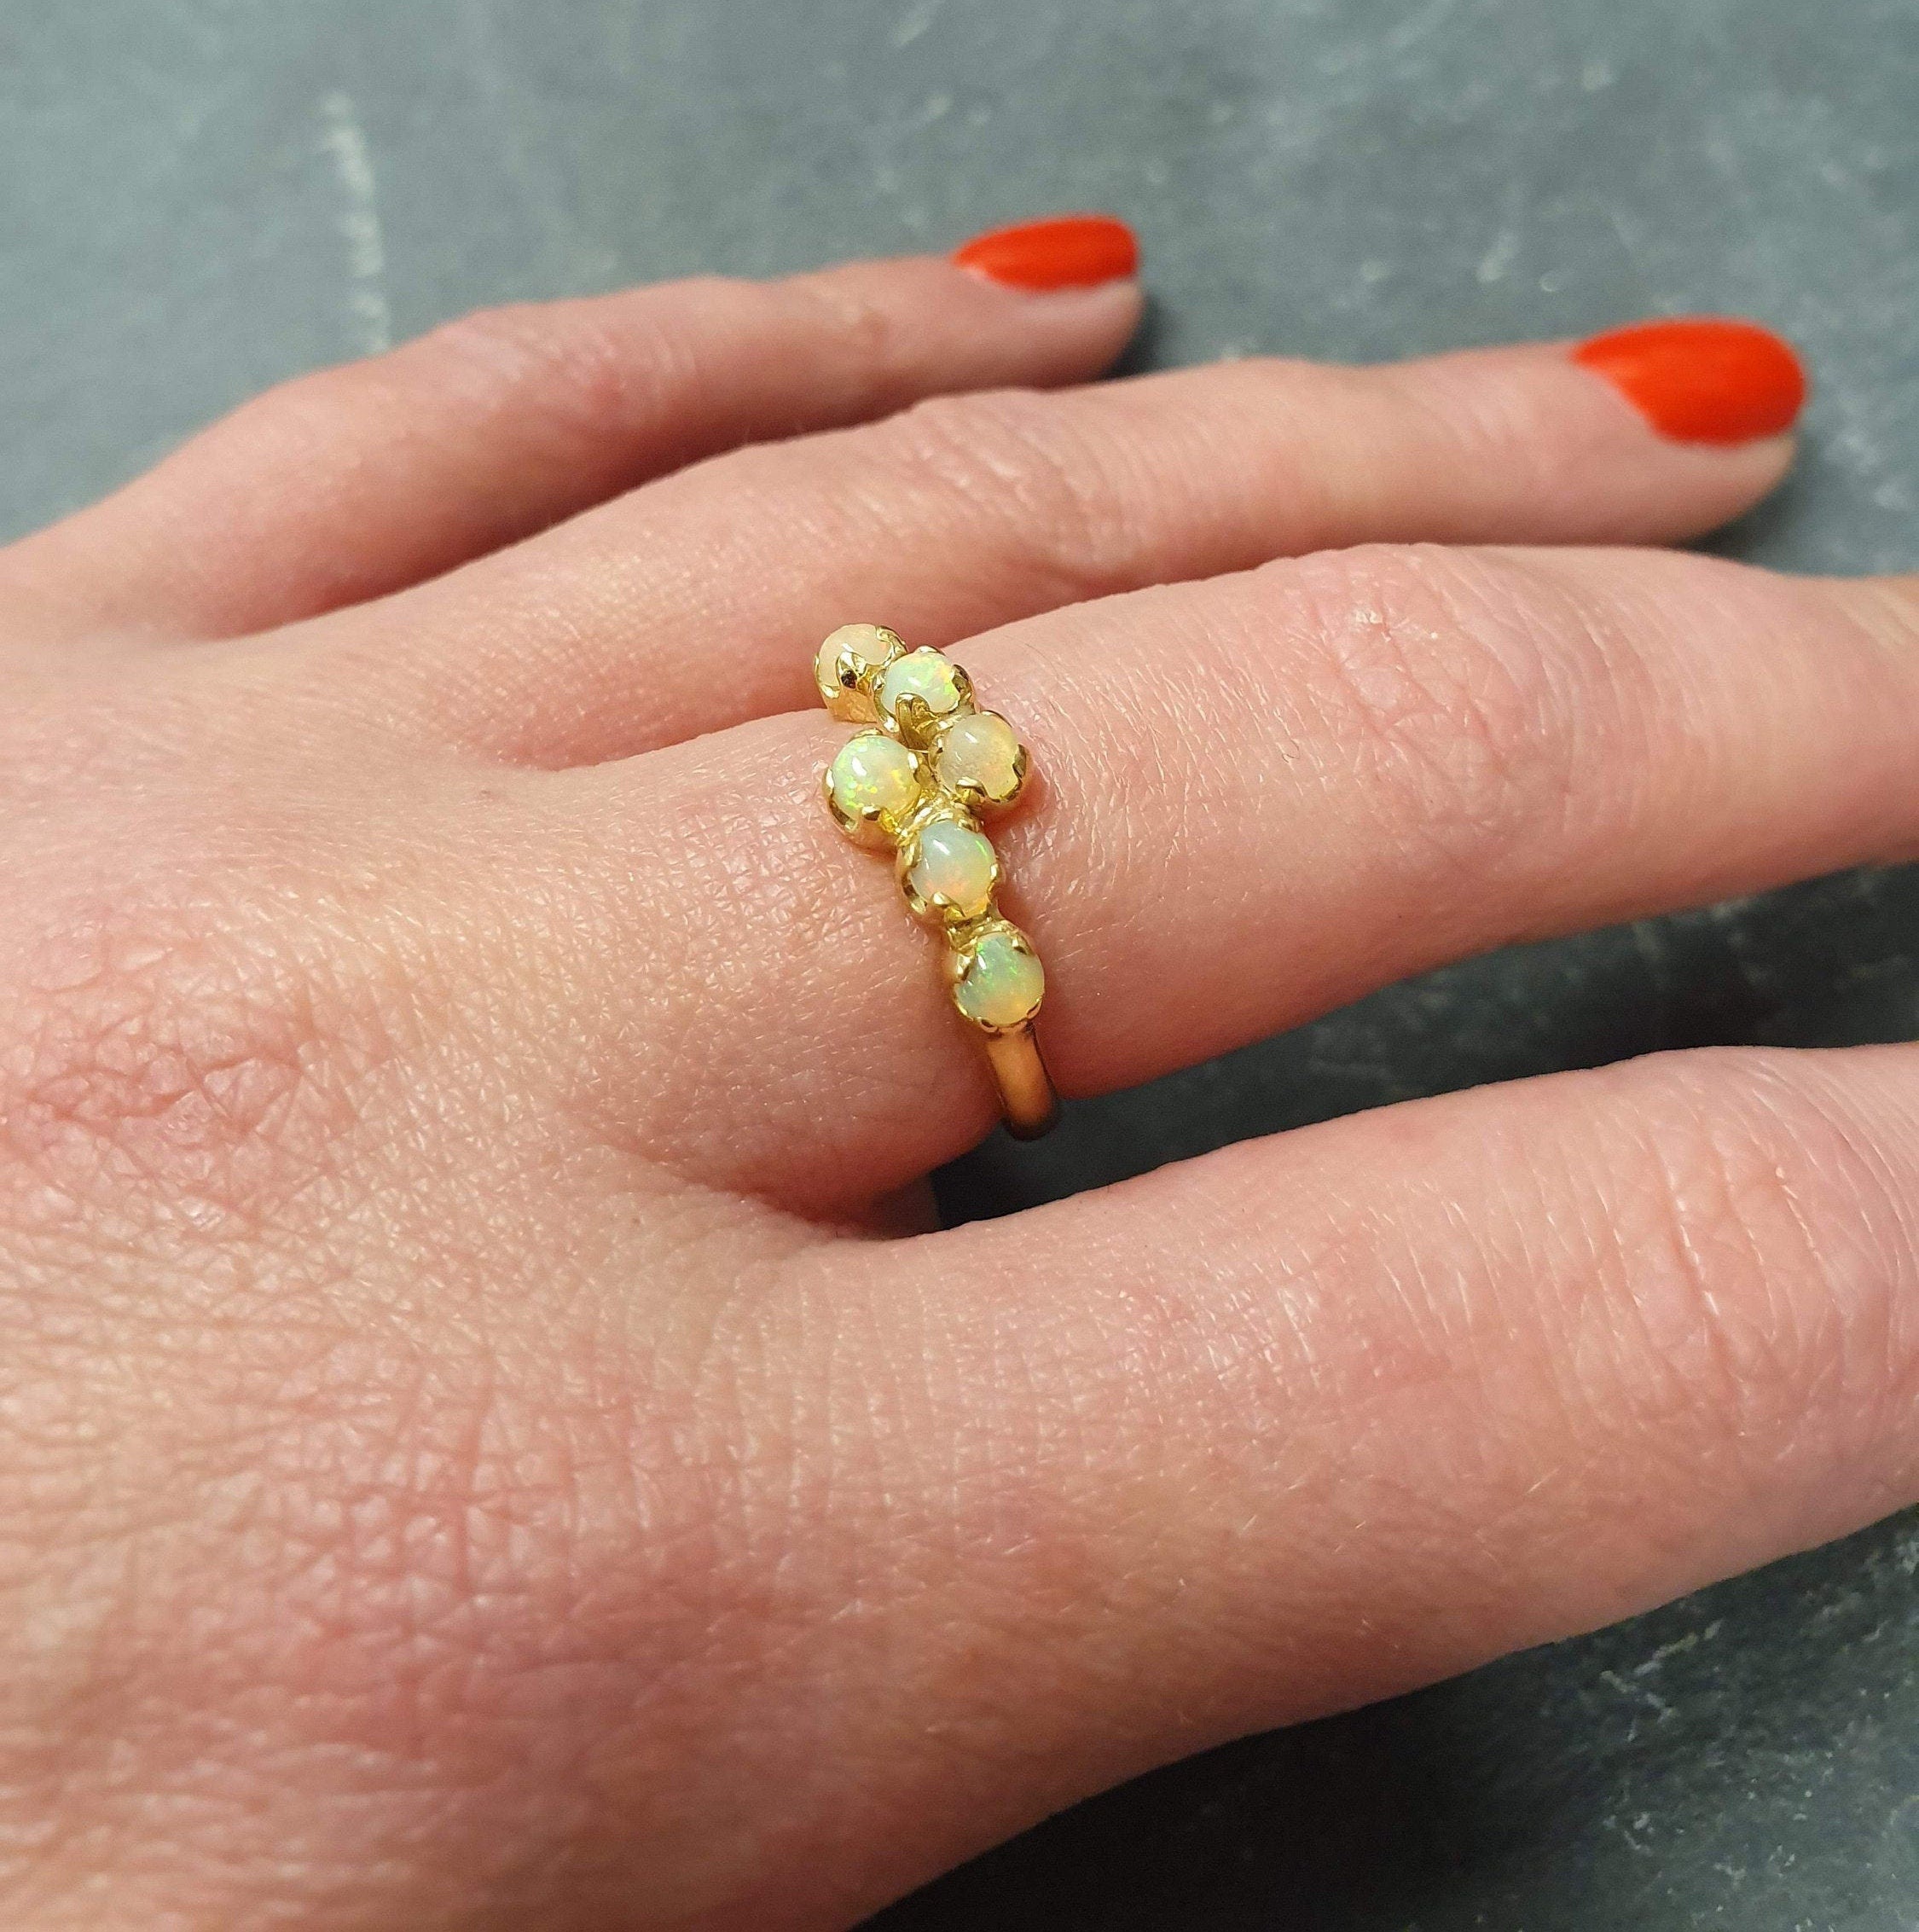 Gold Opal Band, Fire Opal Band, Opal Band, Natural Opal, October Birthstone, Gold Stackable Ring, Vintage Gold Ring, Solid Silver Ring